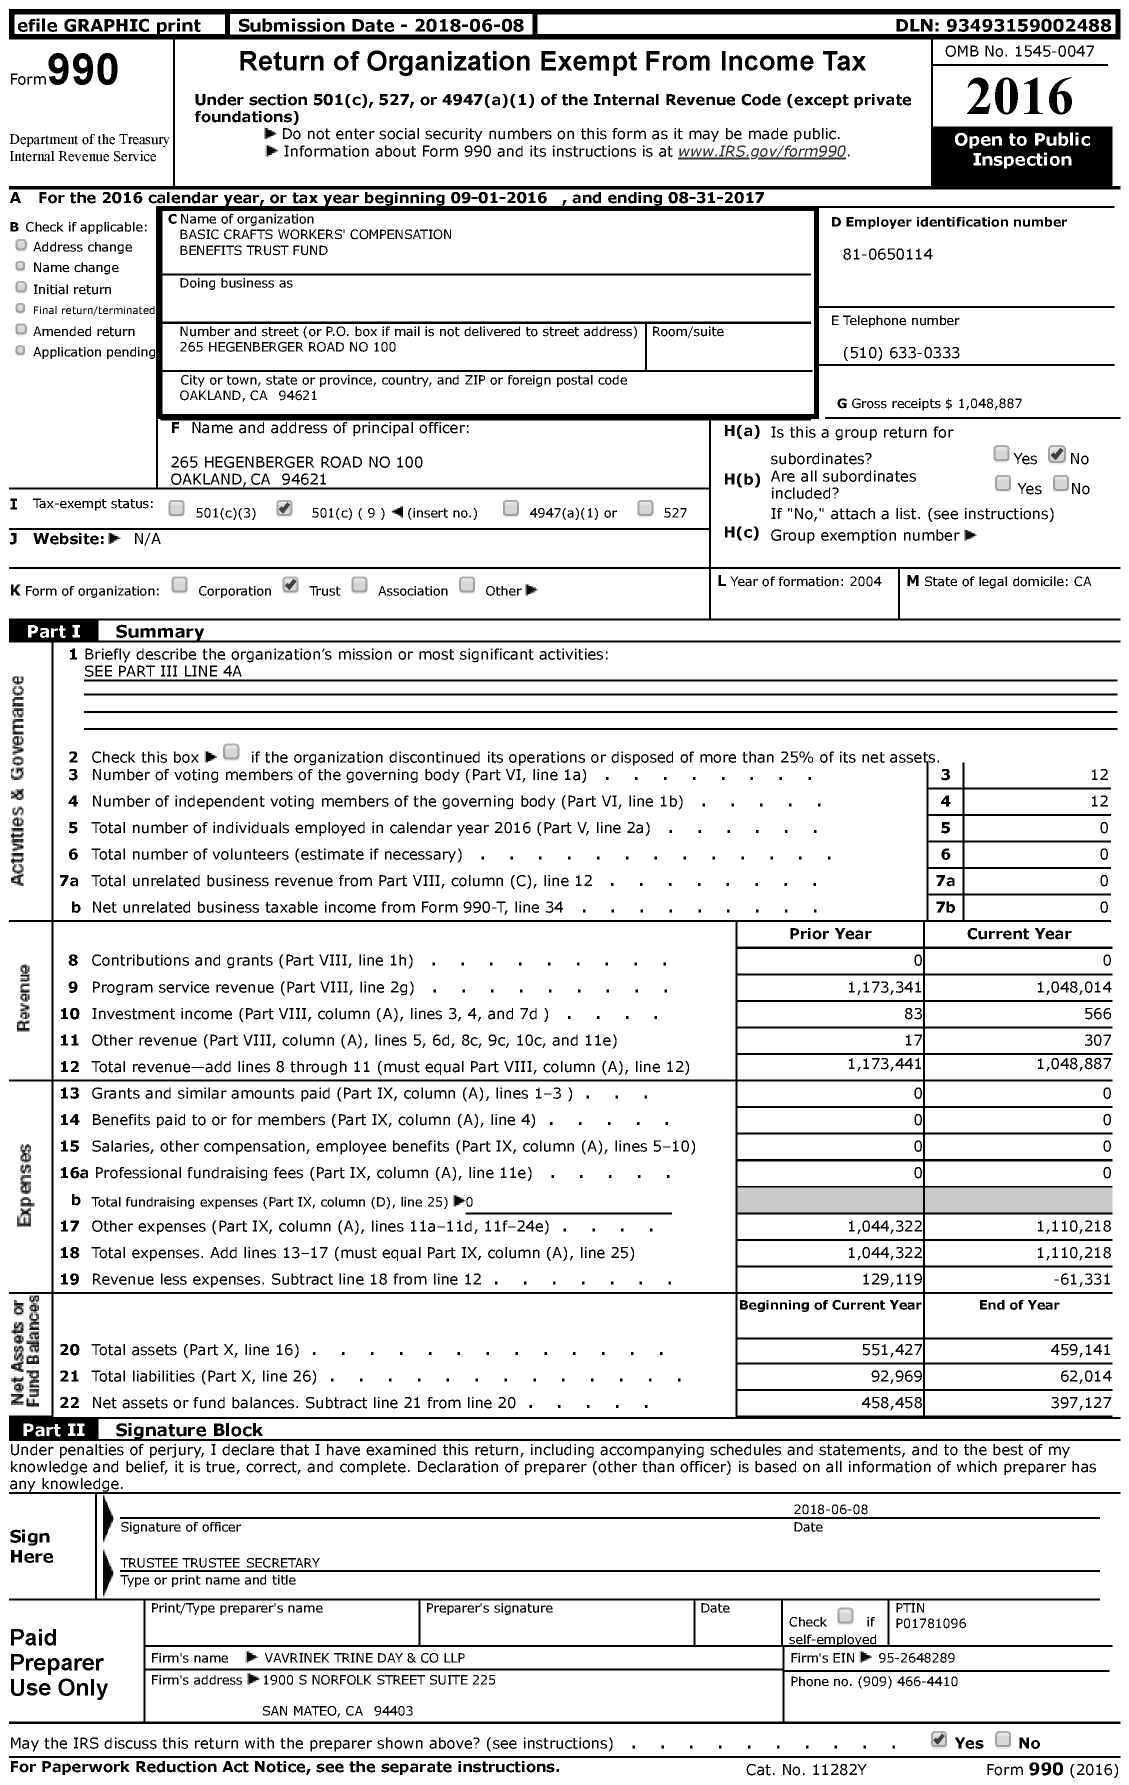 Image of first page of 2016 Form 990 for Basic Crafts Workers' Compensation Benefits Trust Fund